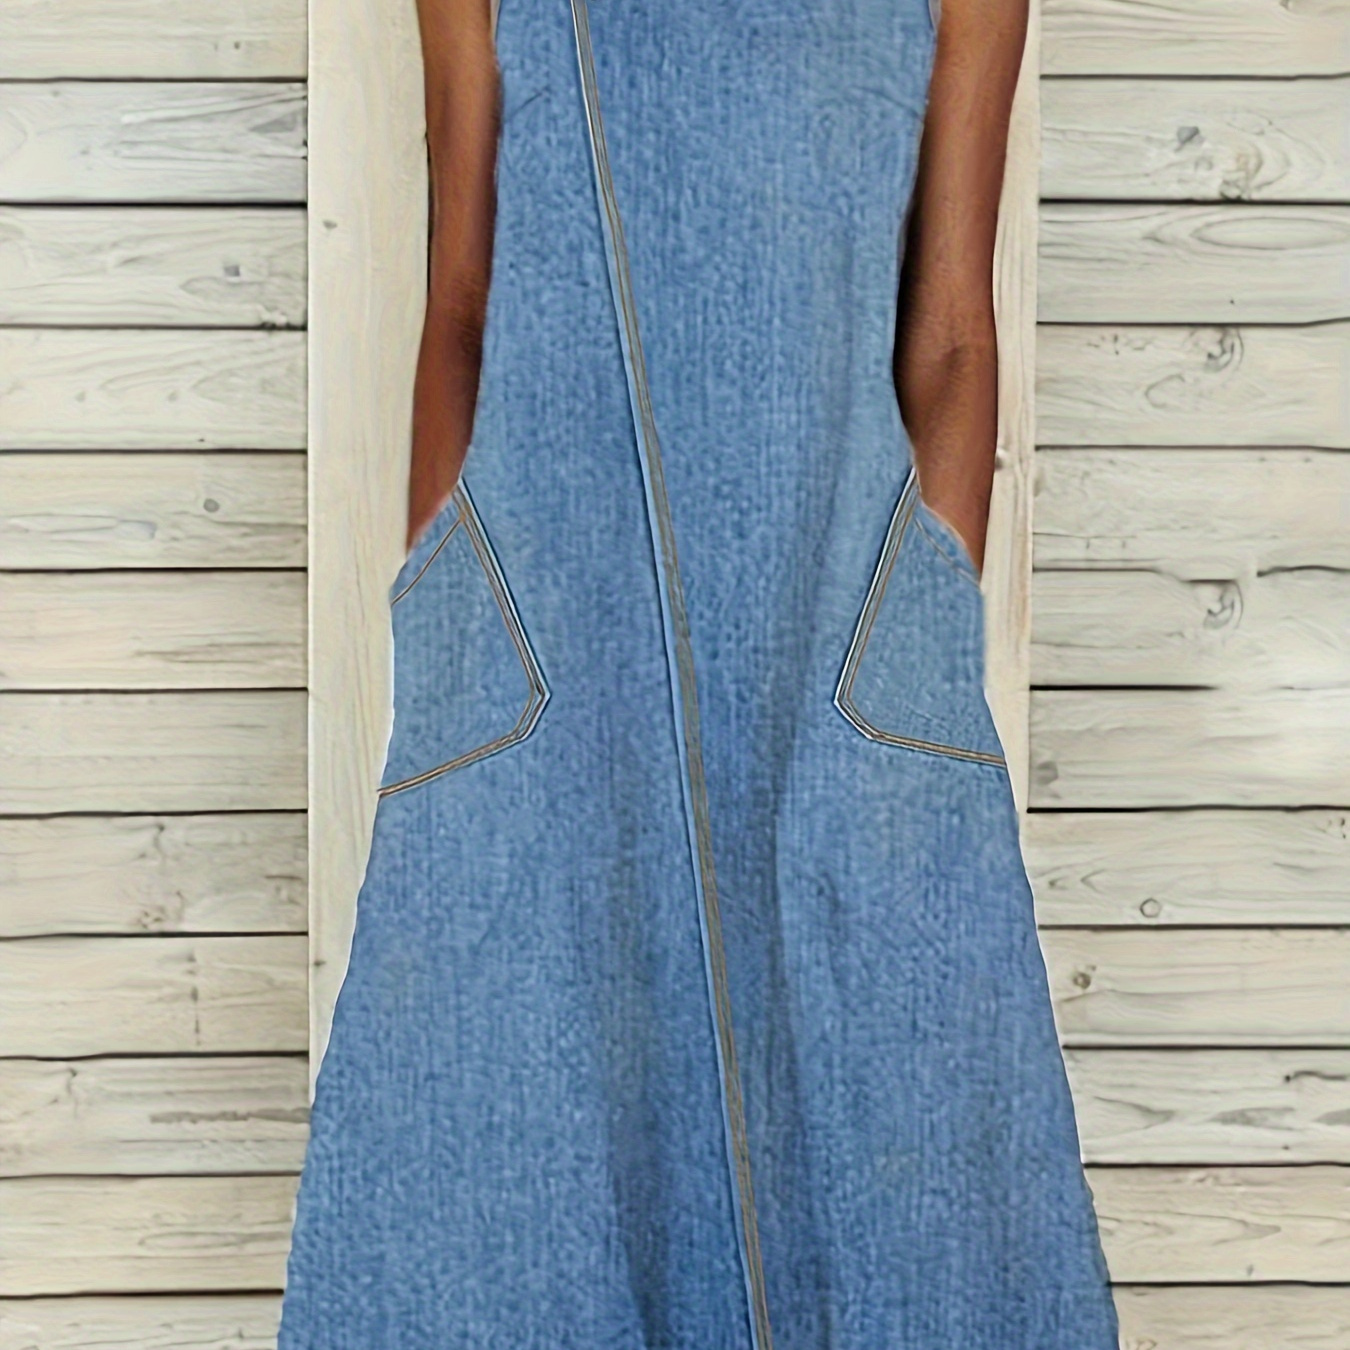 

Plain Washed Blue Buttons Casual Style Patch Pocket Sleeveless Maxi Denim Dress, Women's Denim Jeans & Clothing